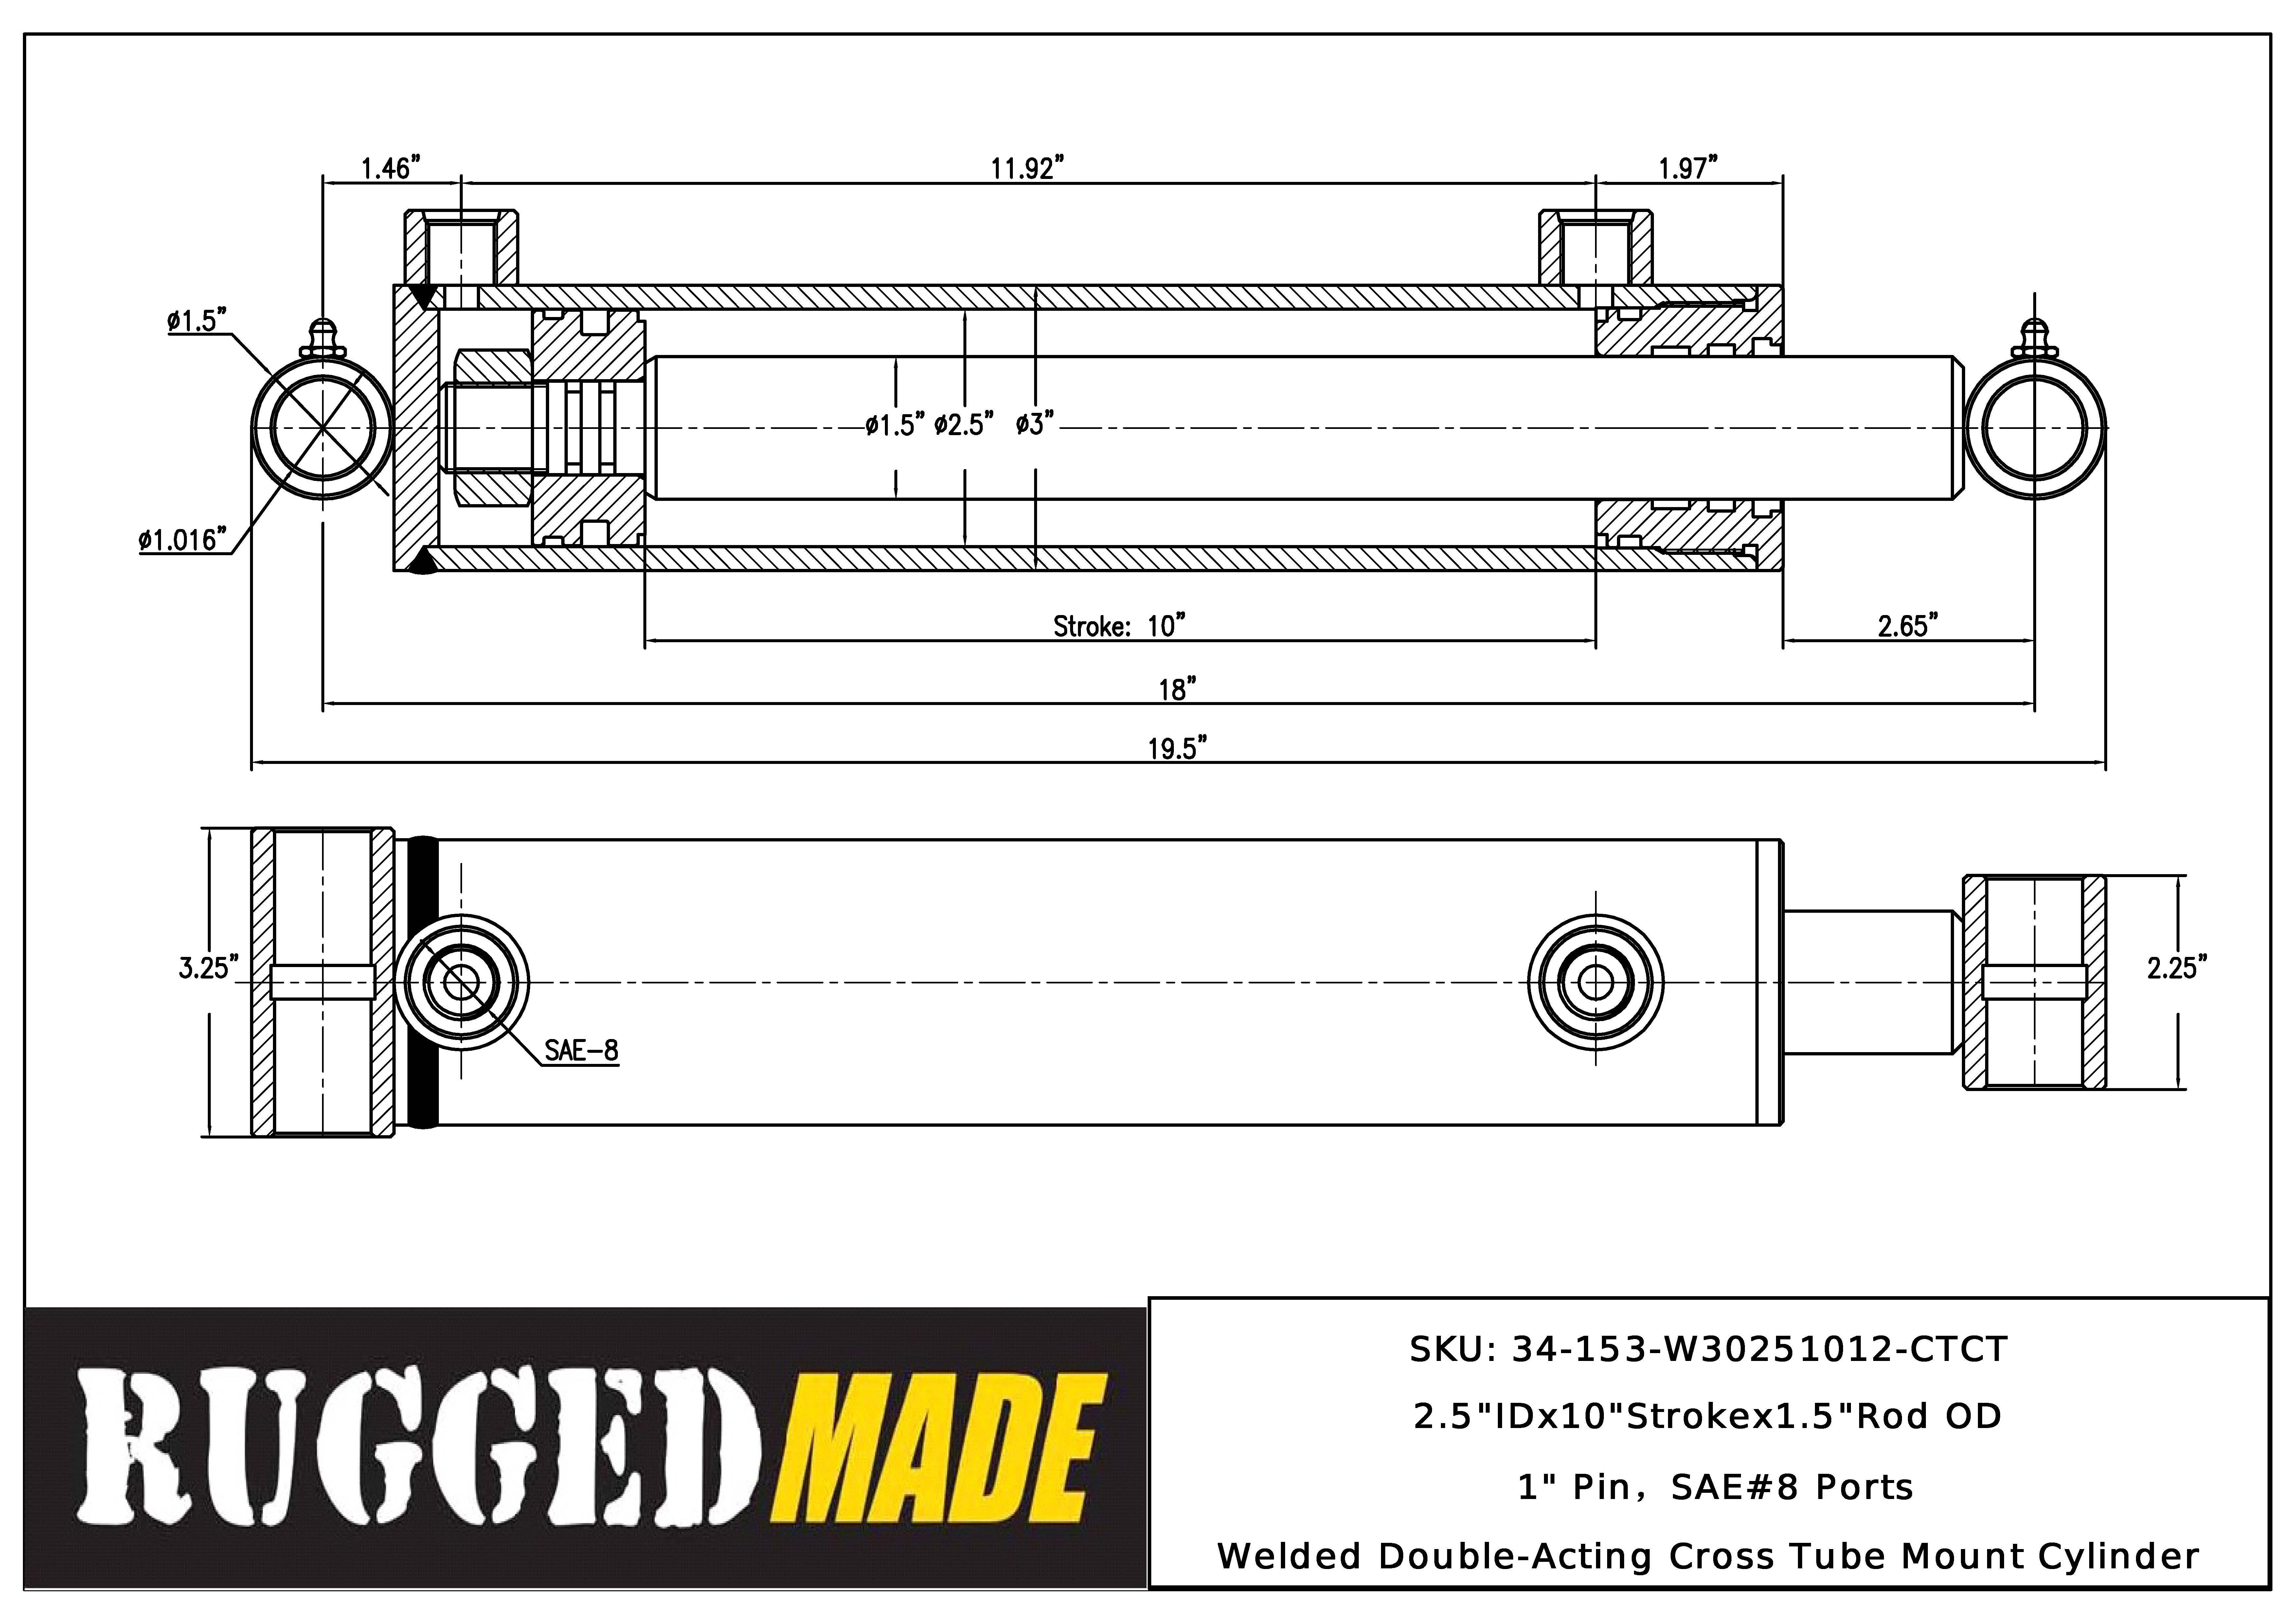 2.5" Bore, 10" Stroke, 1.5" Rod Cylinder Drawing